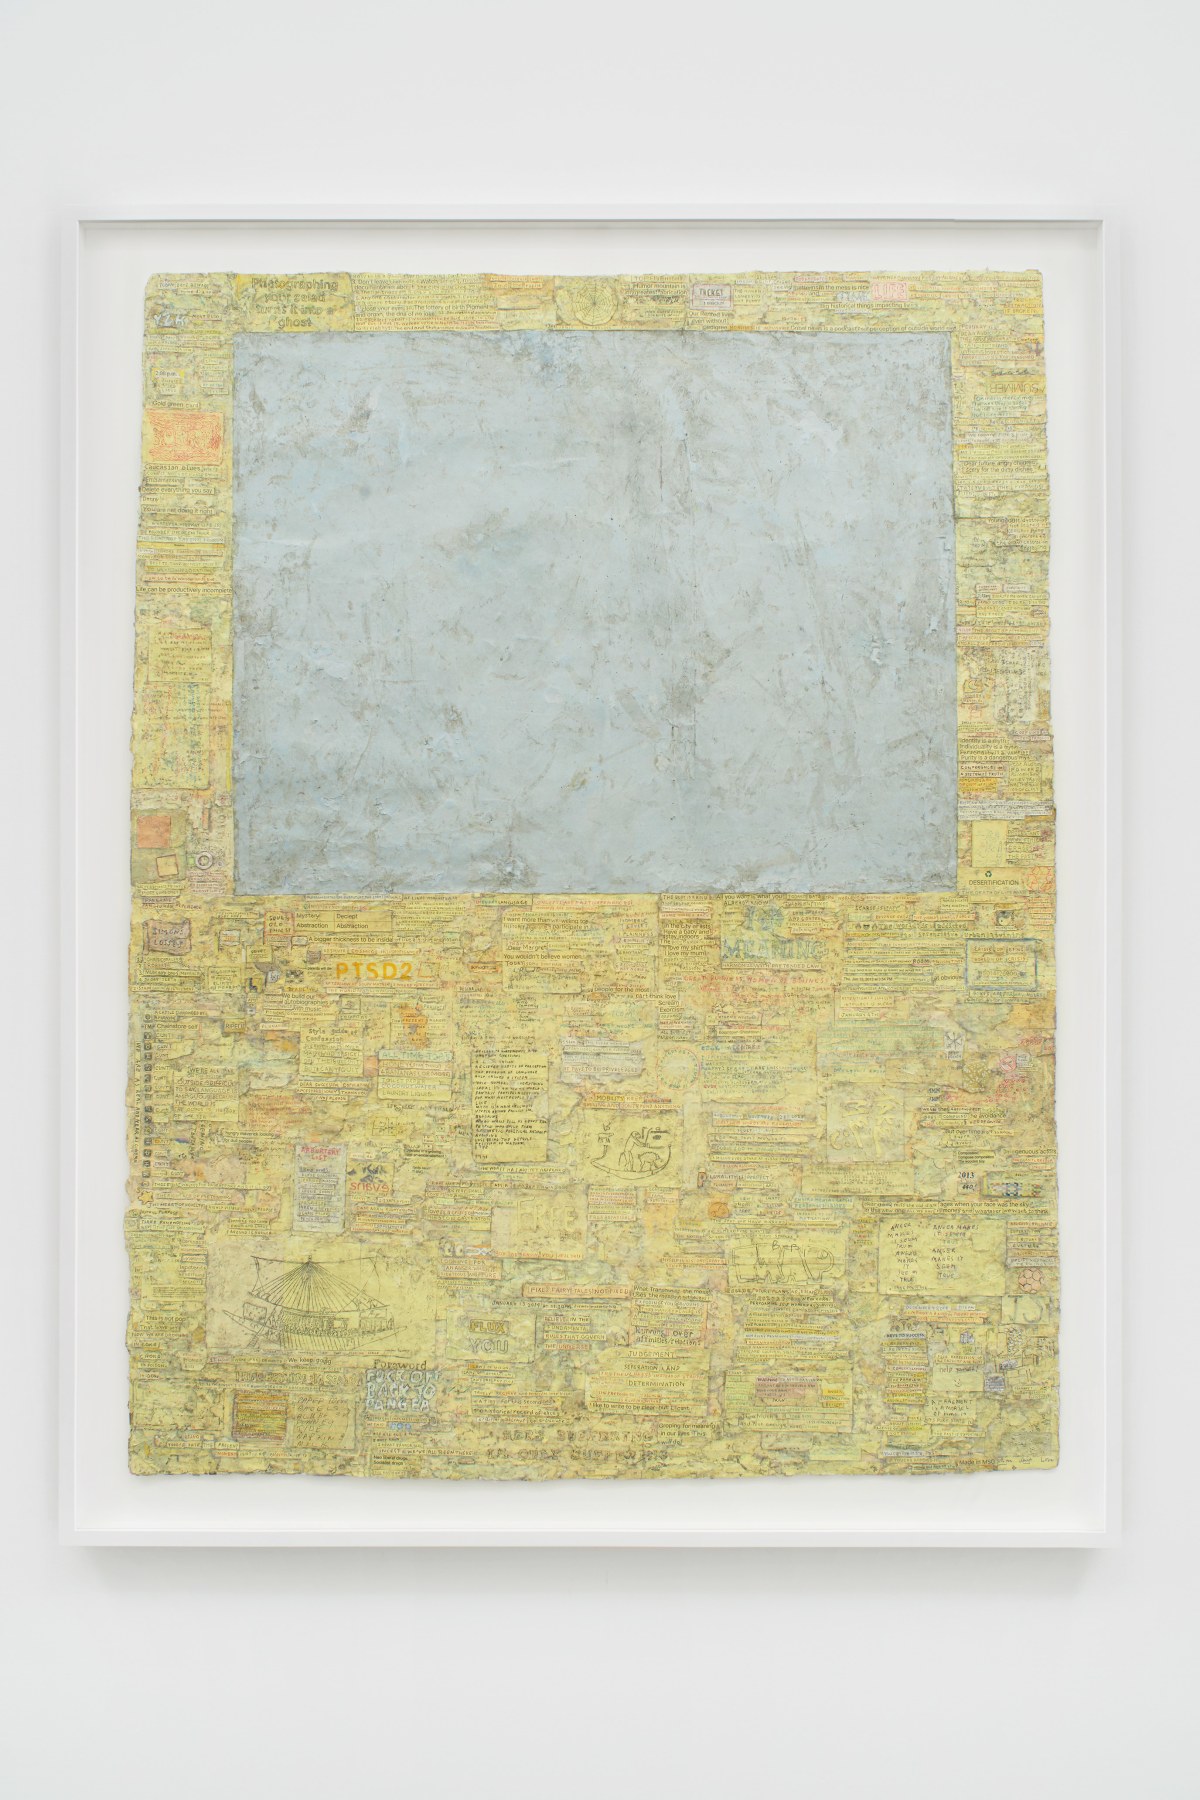 Grey square set into pale yellow field of text handwritten on strips of paper by SIMON EVANS&trade;.